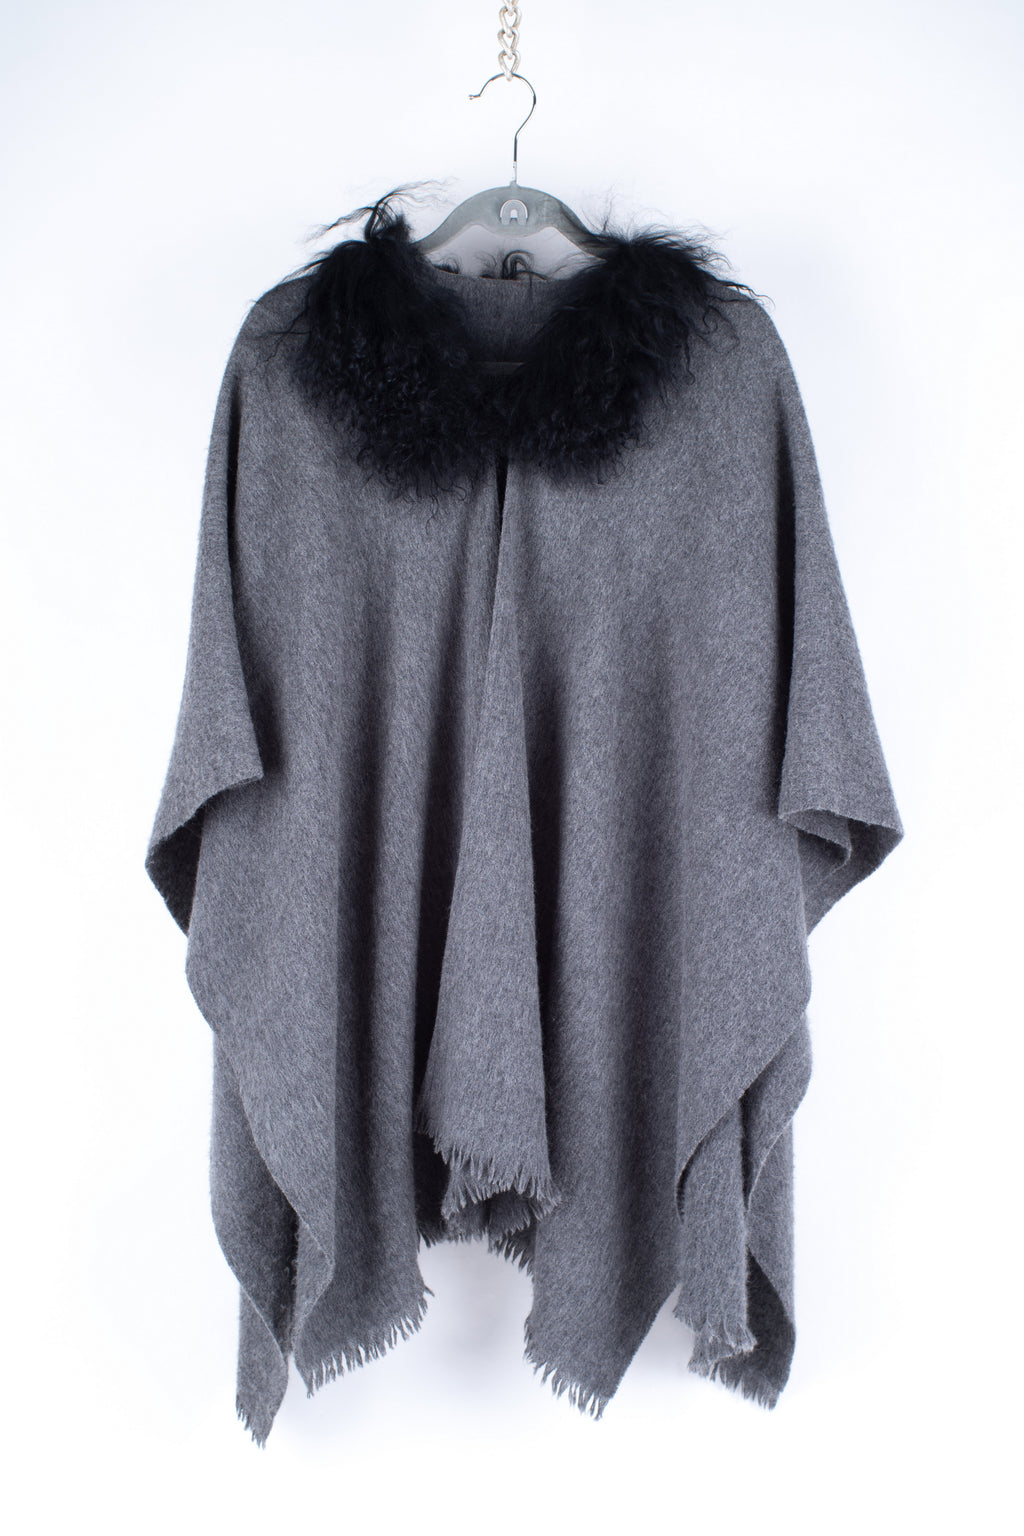 Cashmere Blend Gray Cape With Curly Sheep Fur Collar